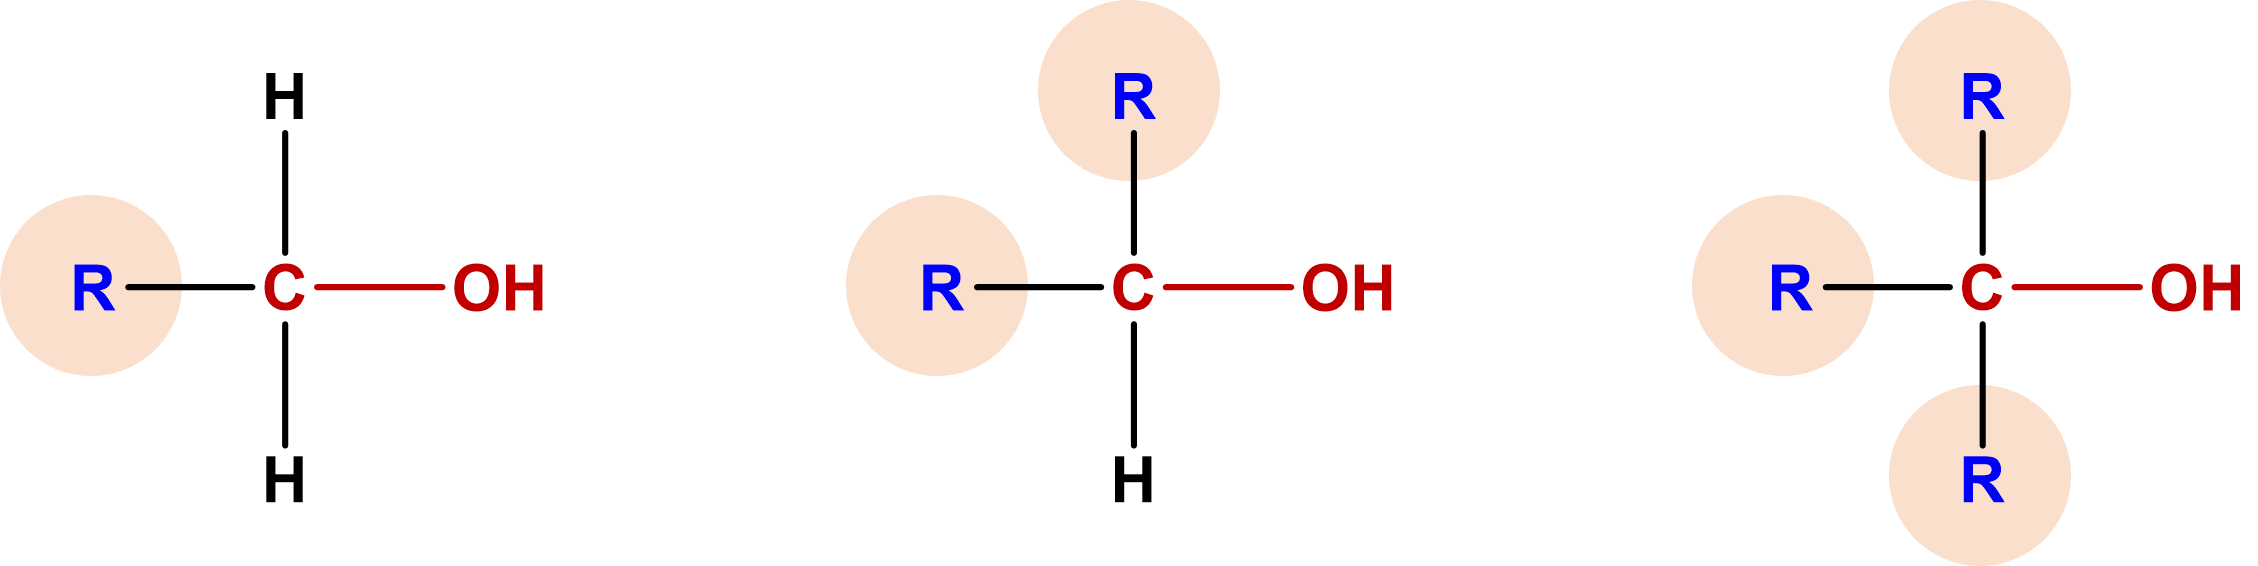 classification of alcohols